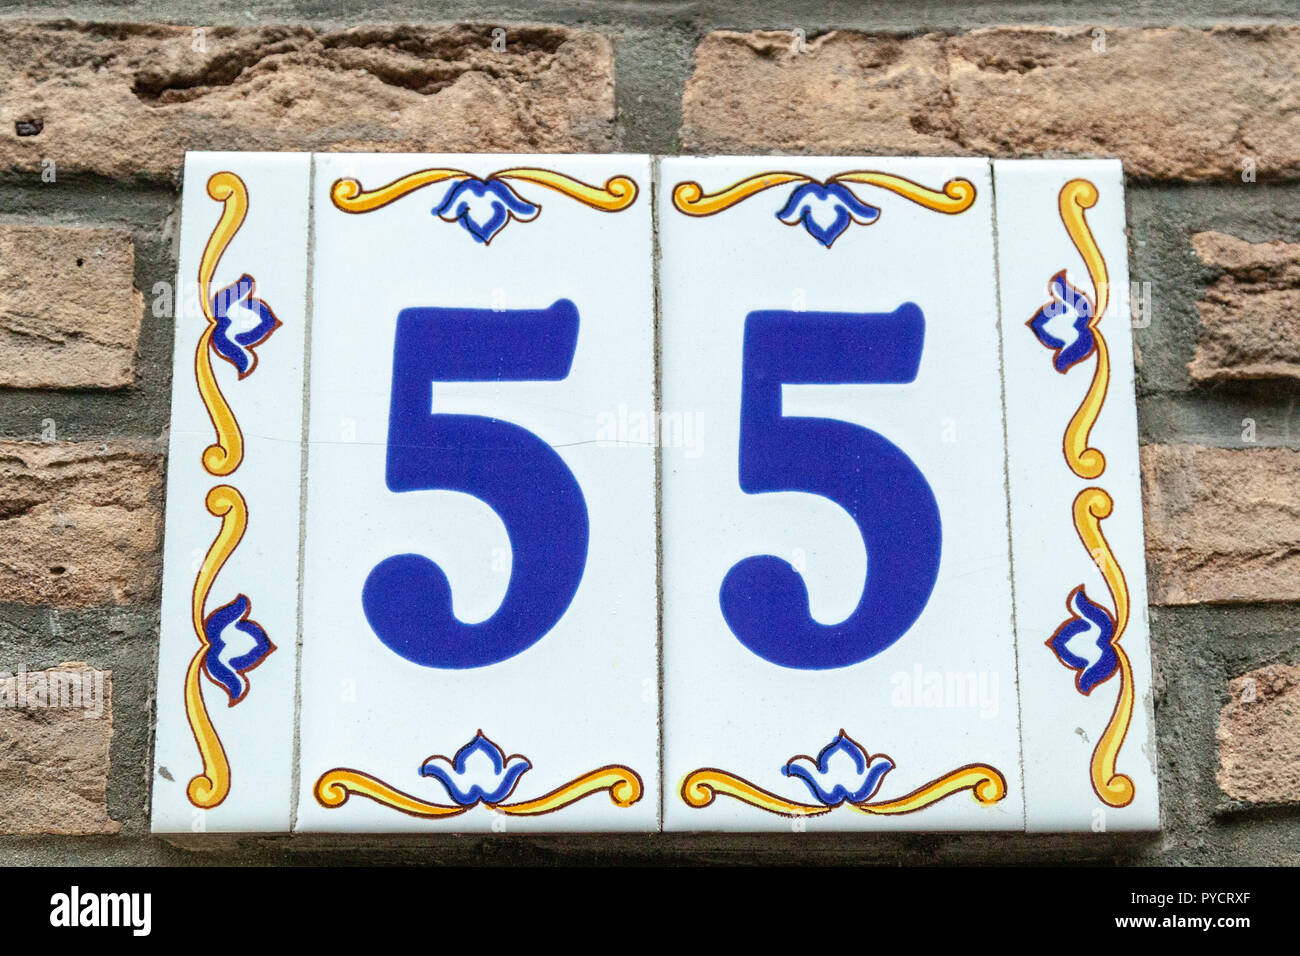 House number fifty-five 55 painted on ceramic tile in blue and yellow, red and gold from Sweden Stock Photo